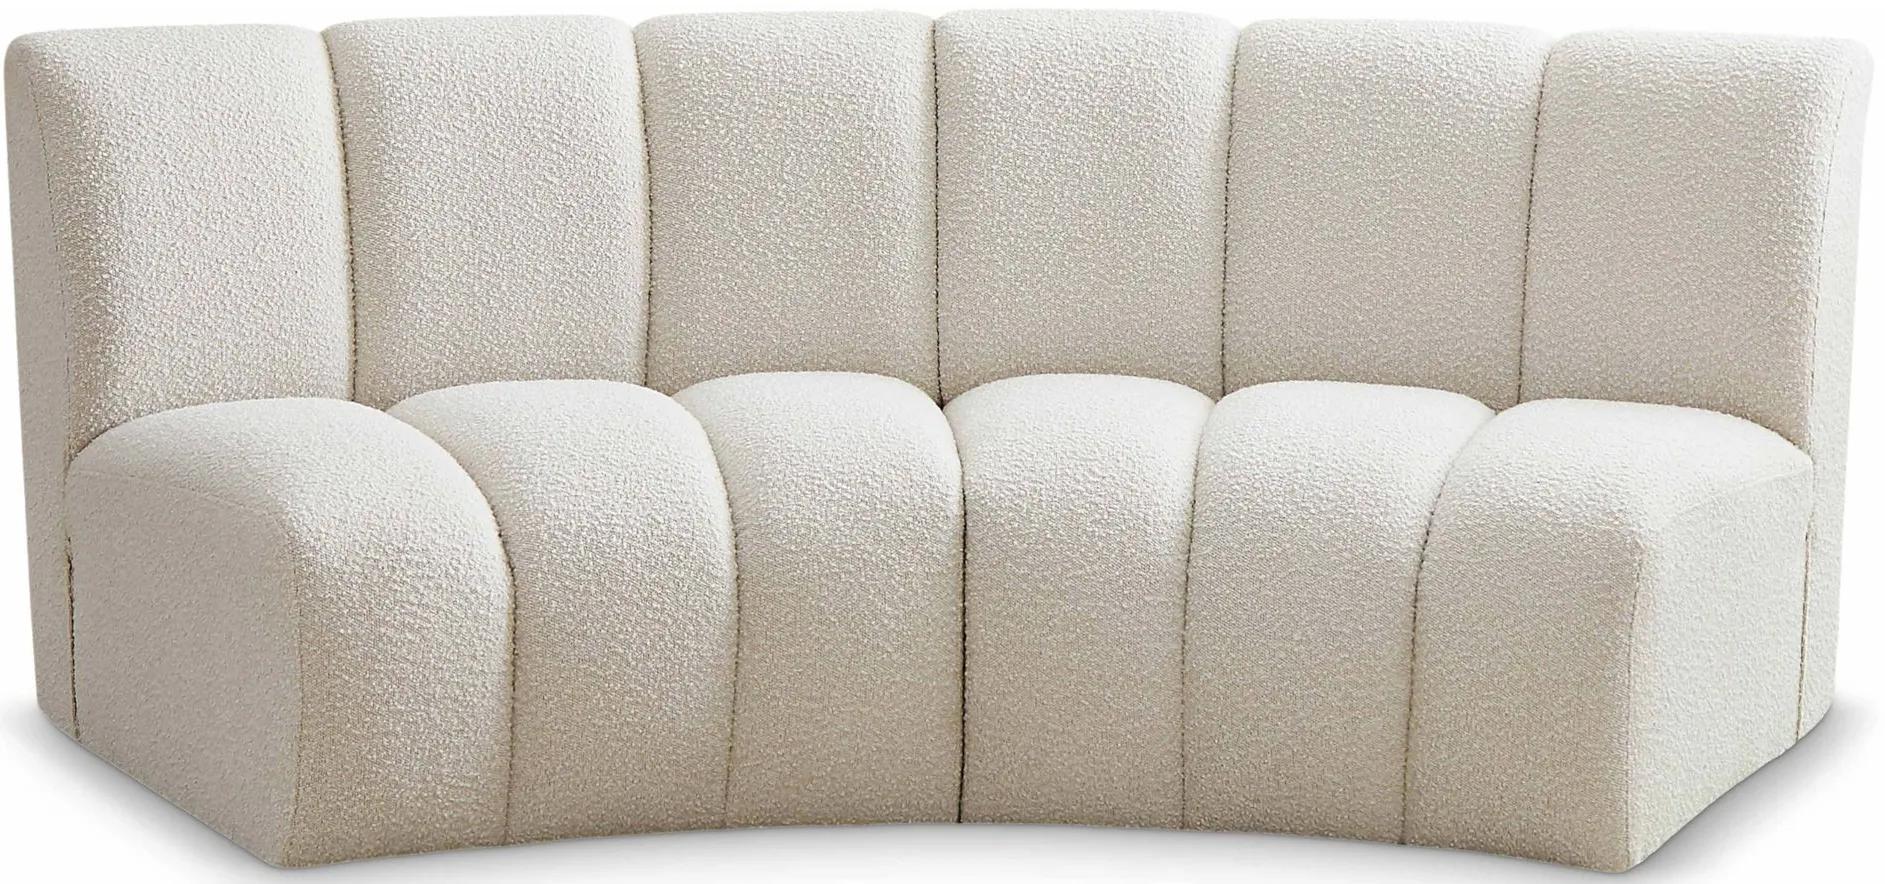 Infinity 2pc. Modular Sectional in Cream by Meridian Furniture